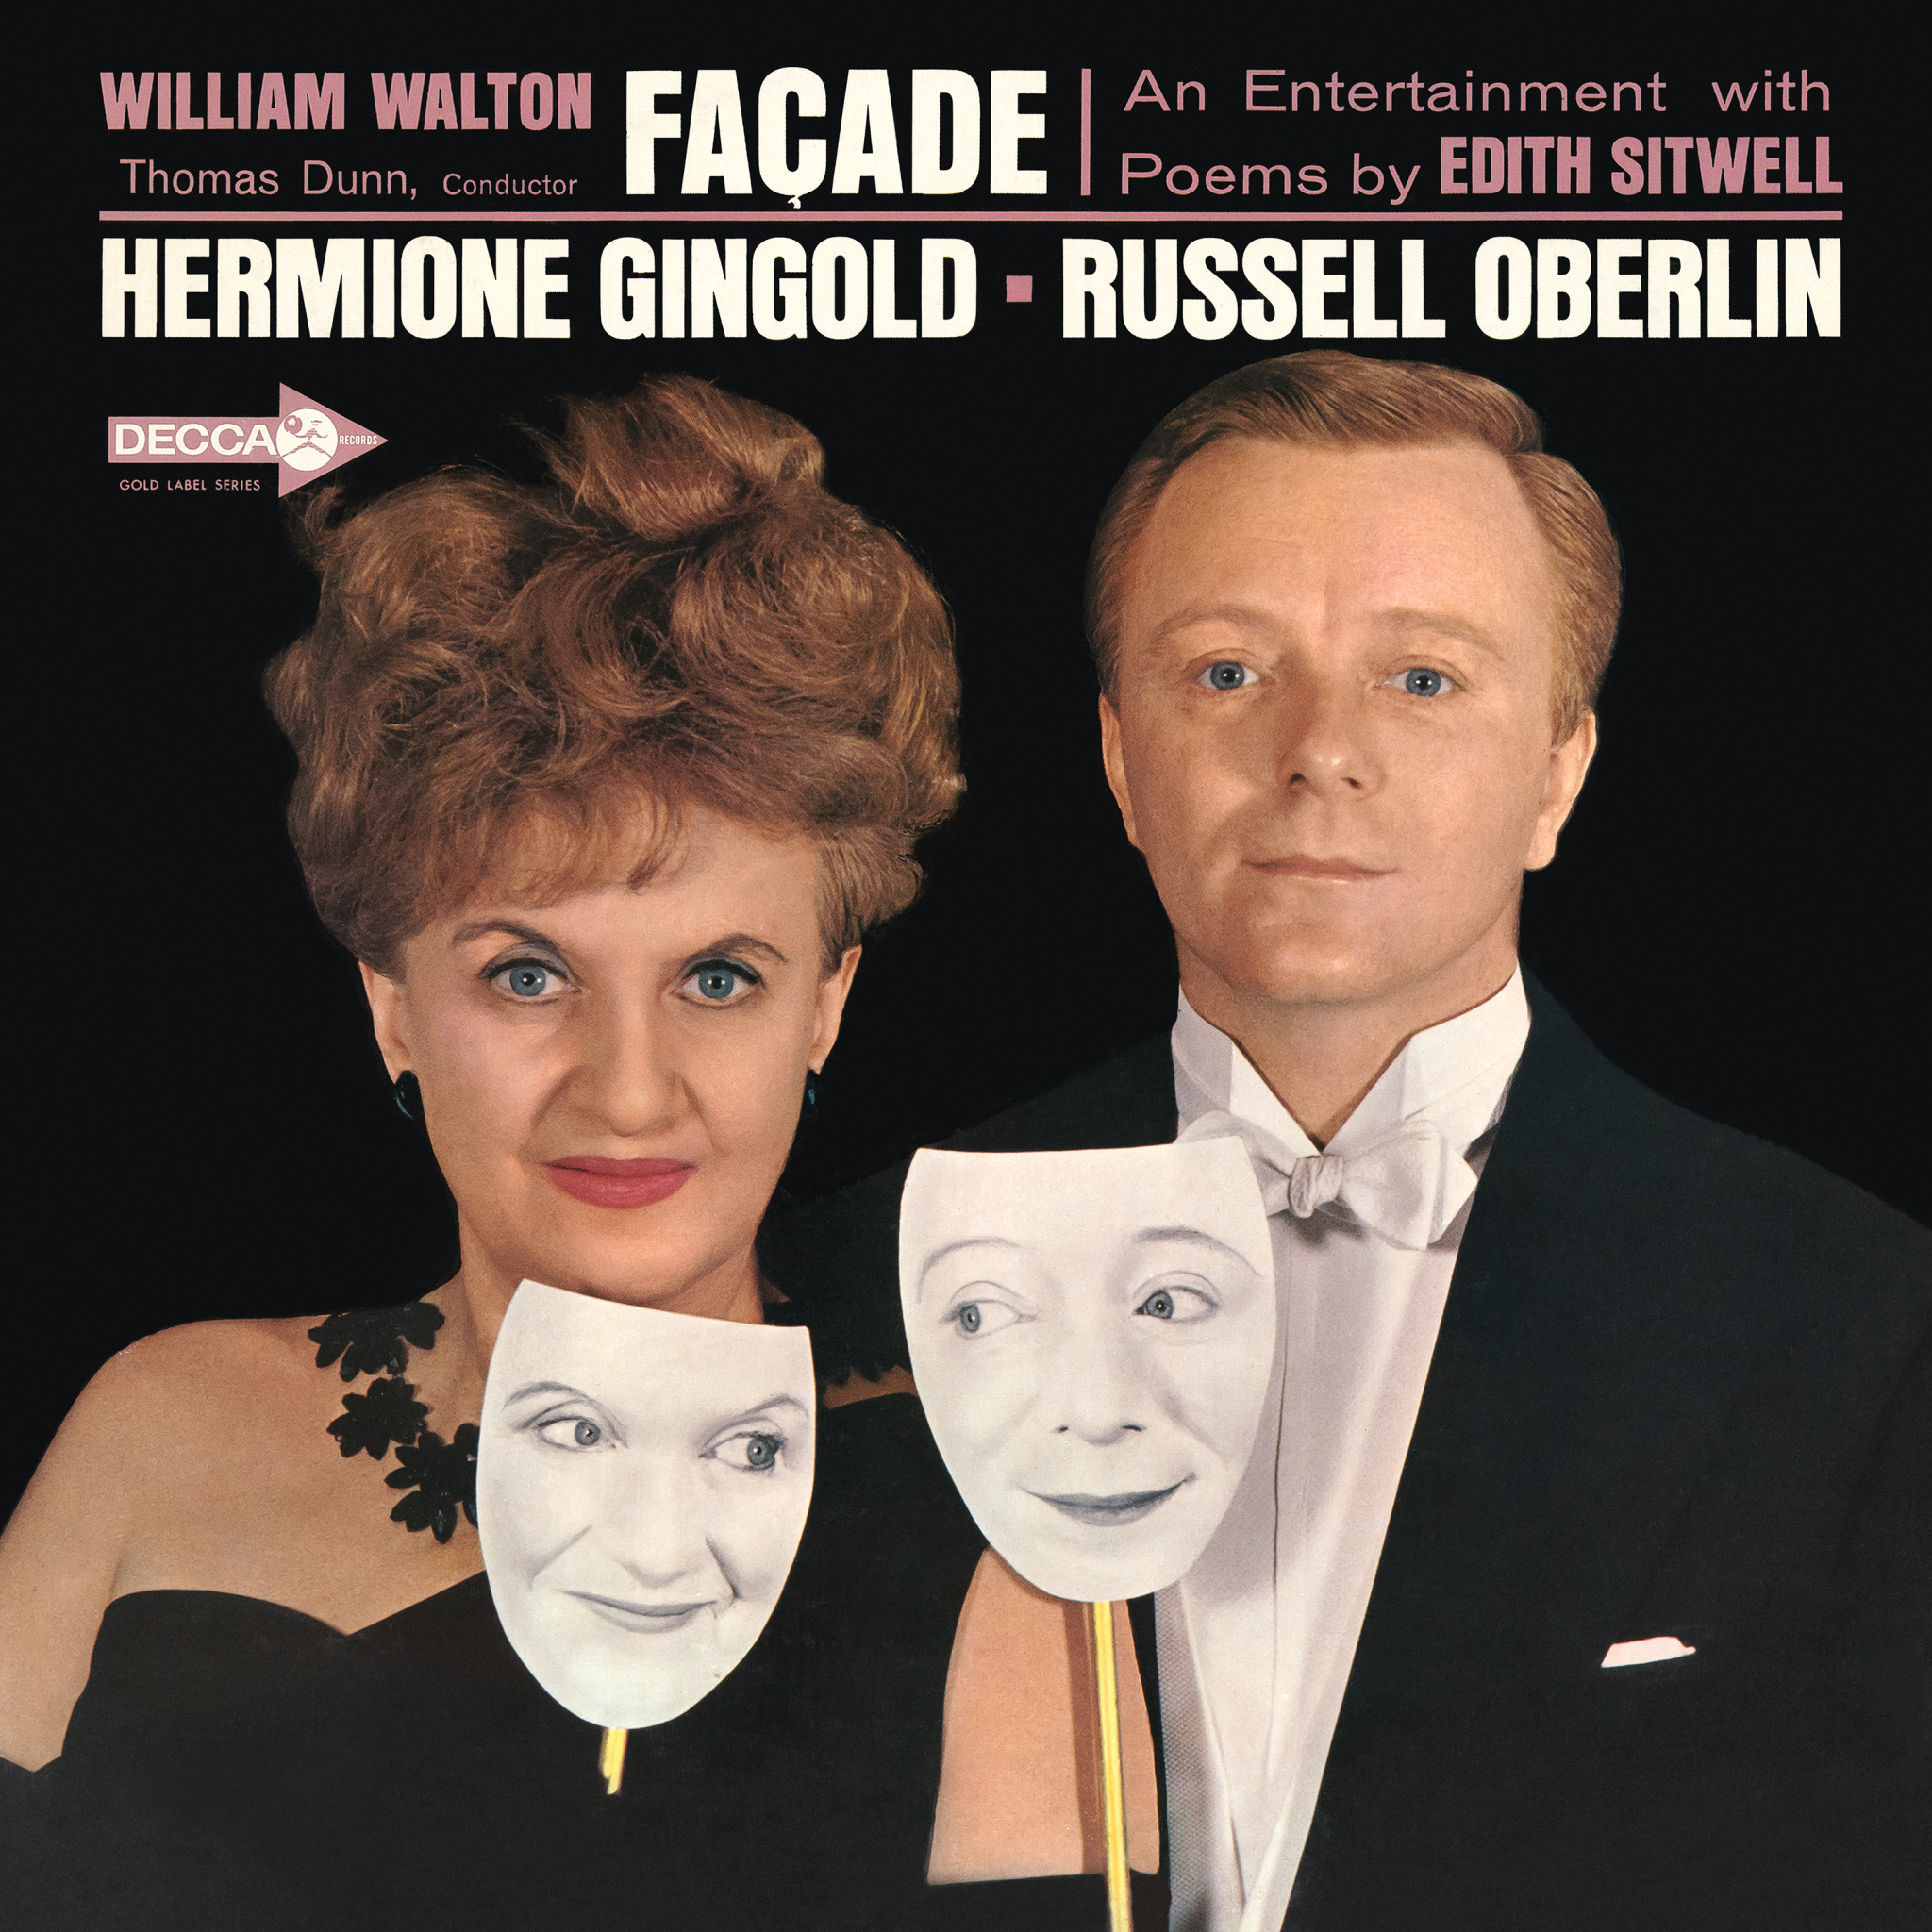 Russell Oberlin - William Walton's Façade, An Entertainment With Poems By Edith Sitwell